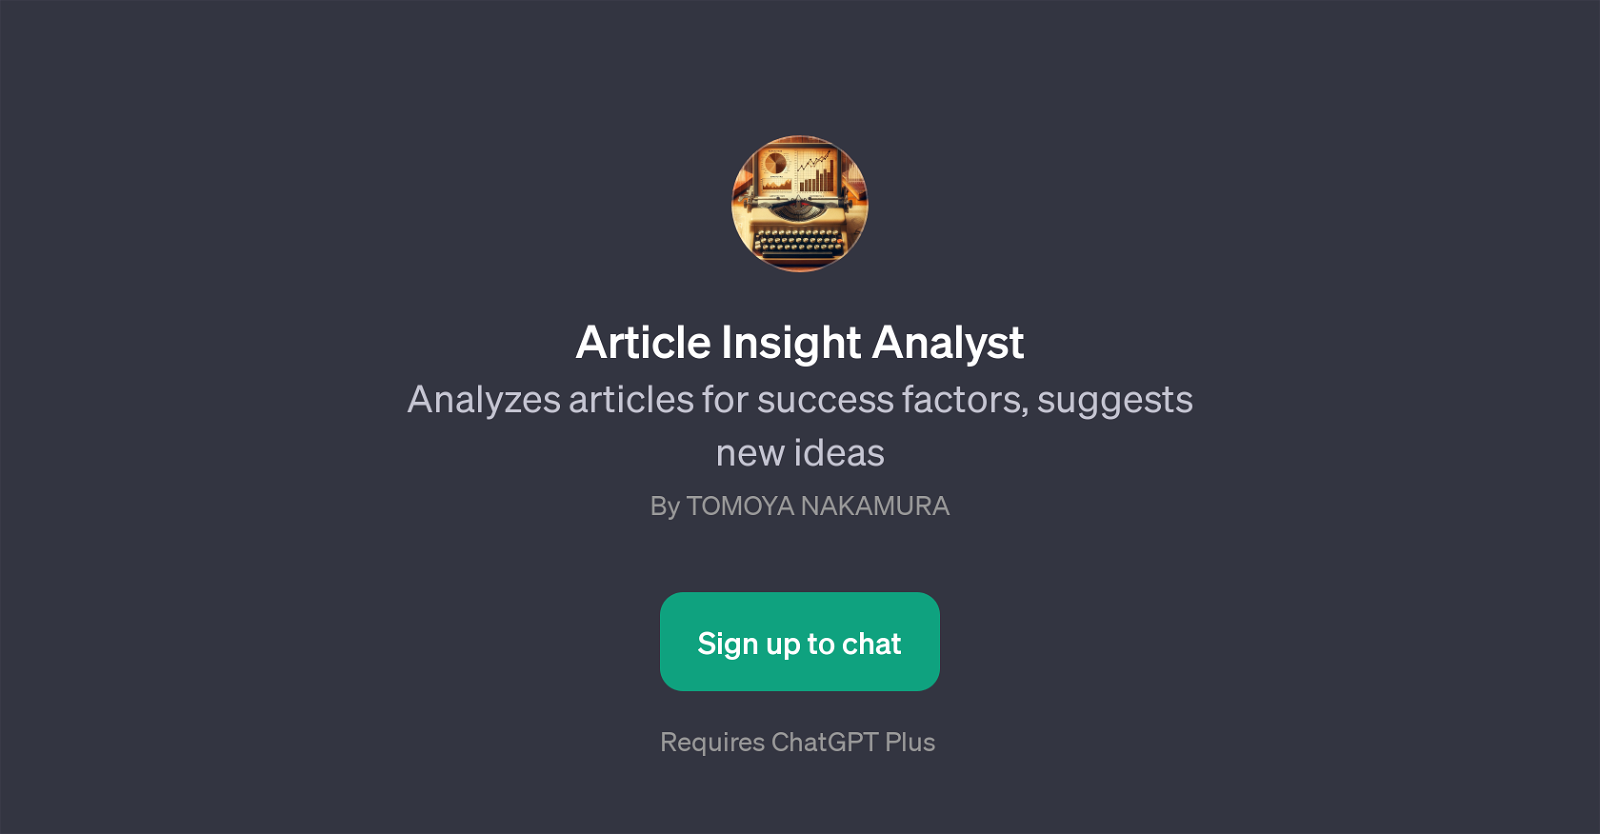 Article Insight Analyst website